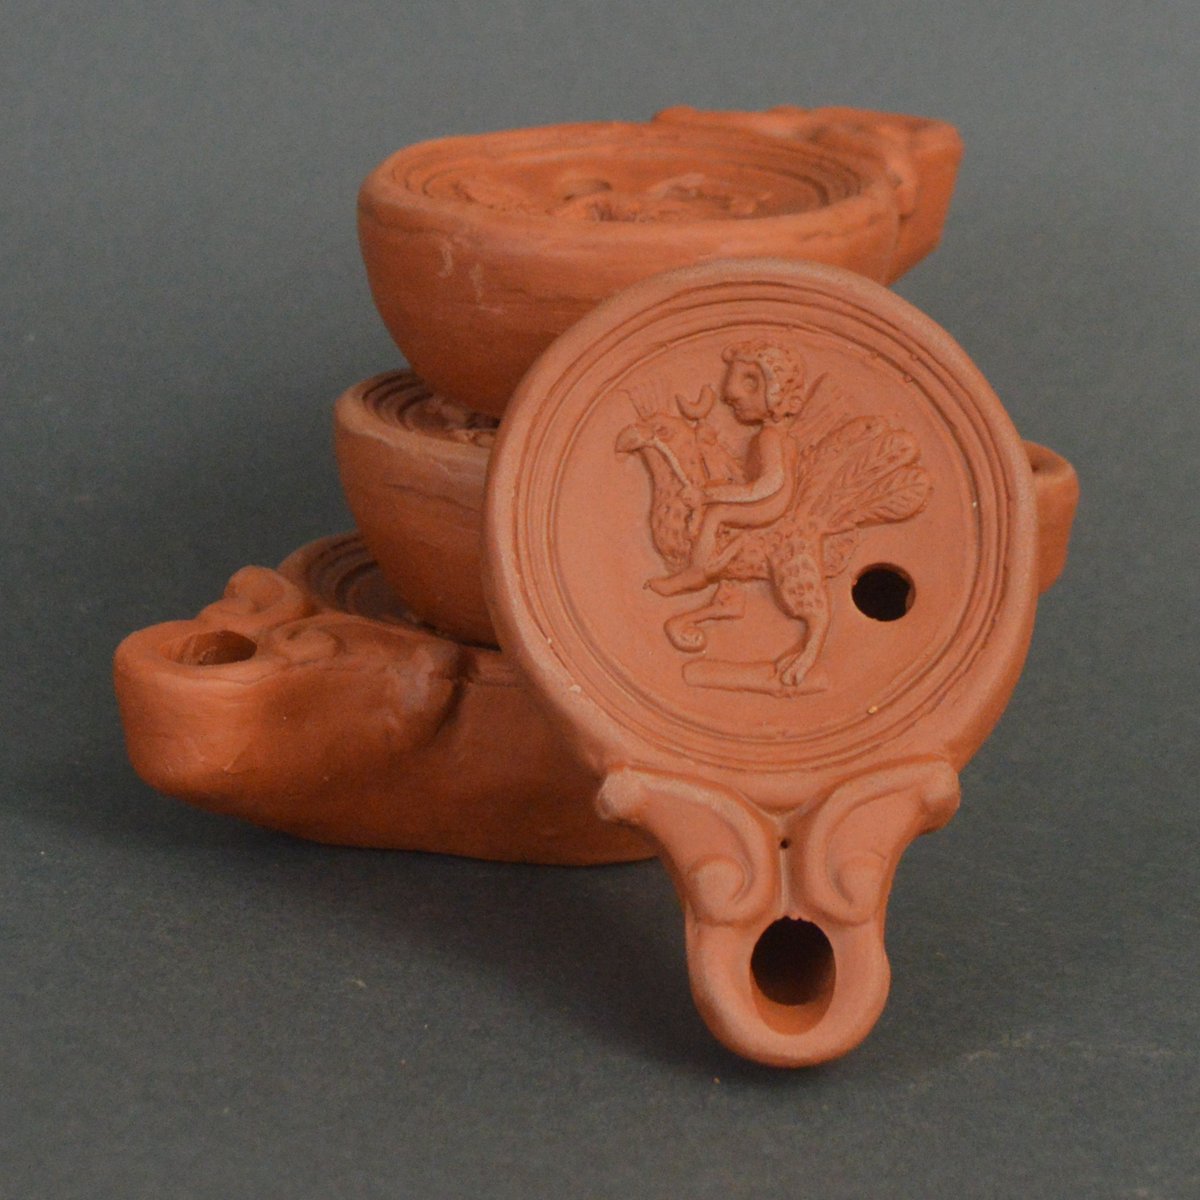 Today, I have been working on some new Roman oil lamp designs, which is always fun. We are making one of them for a museum in Ireland, but we will make all the designs available to you when they are finished. Check out our full range of oil lamps here - buff.ly/3JozKeG